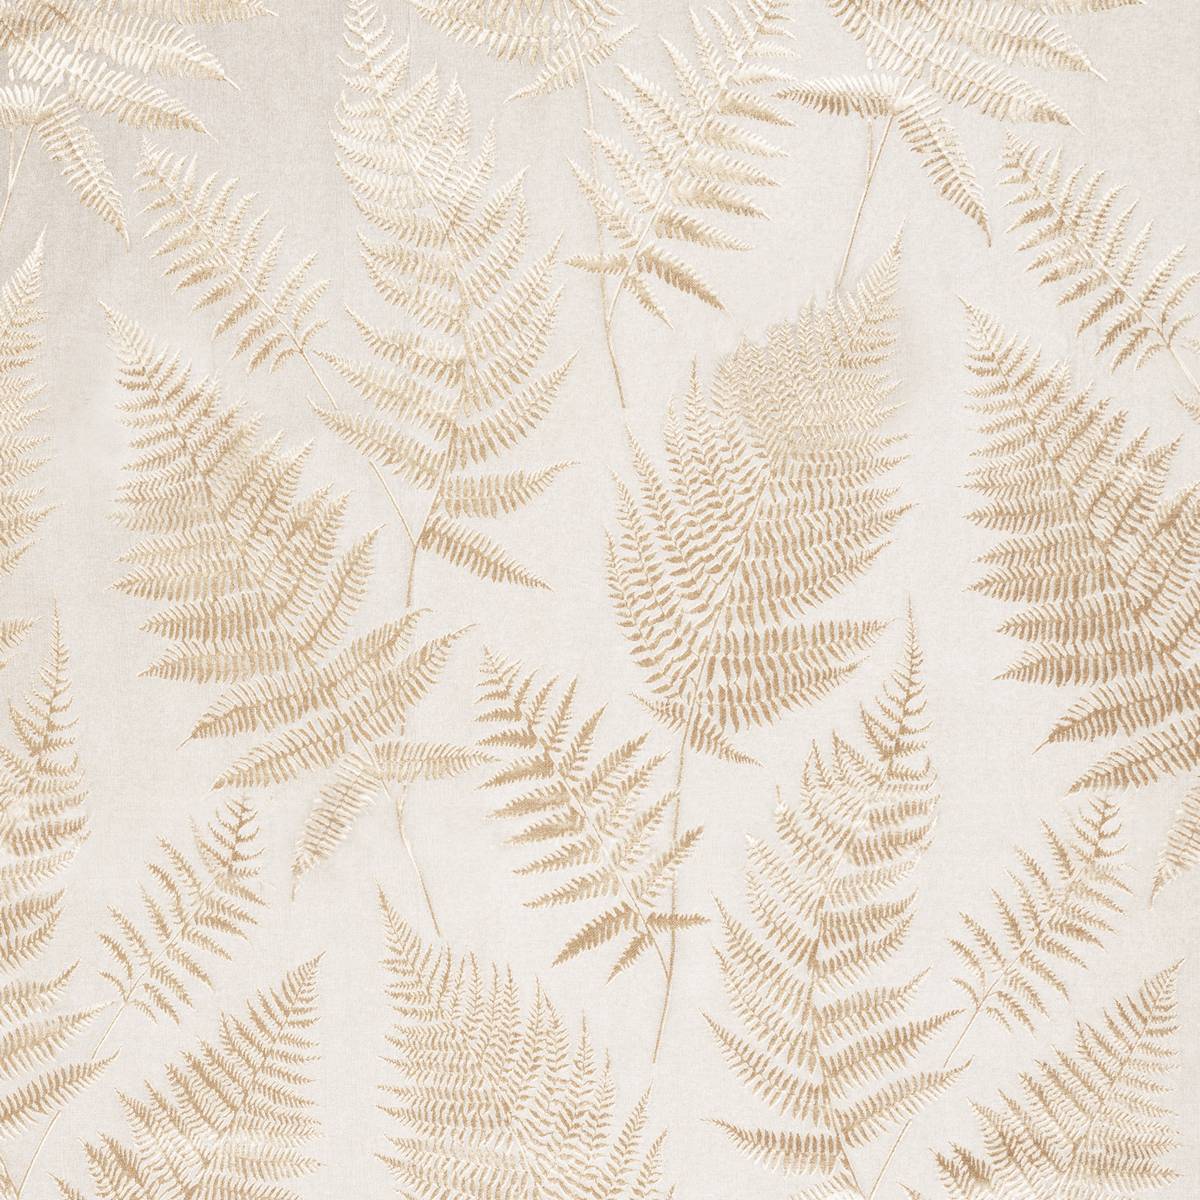 Affinis Champagne Fabric by Ashley Wilde